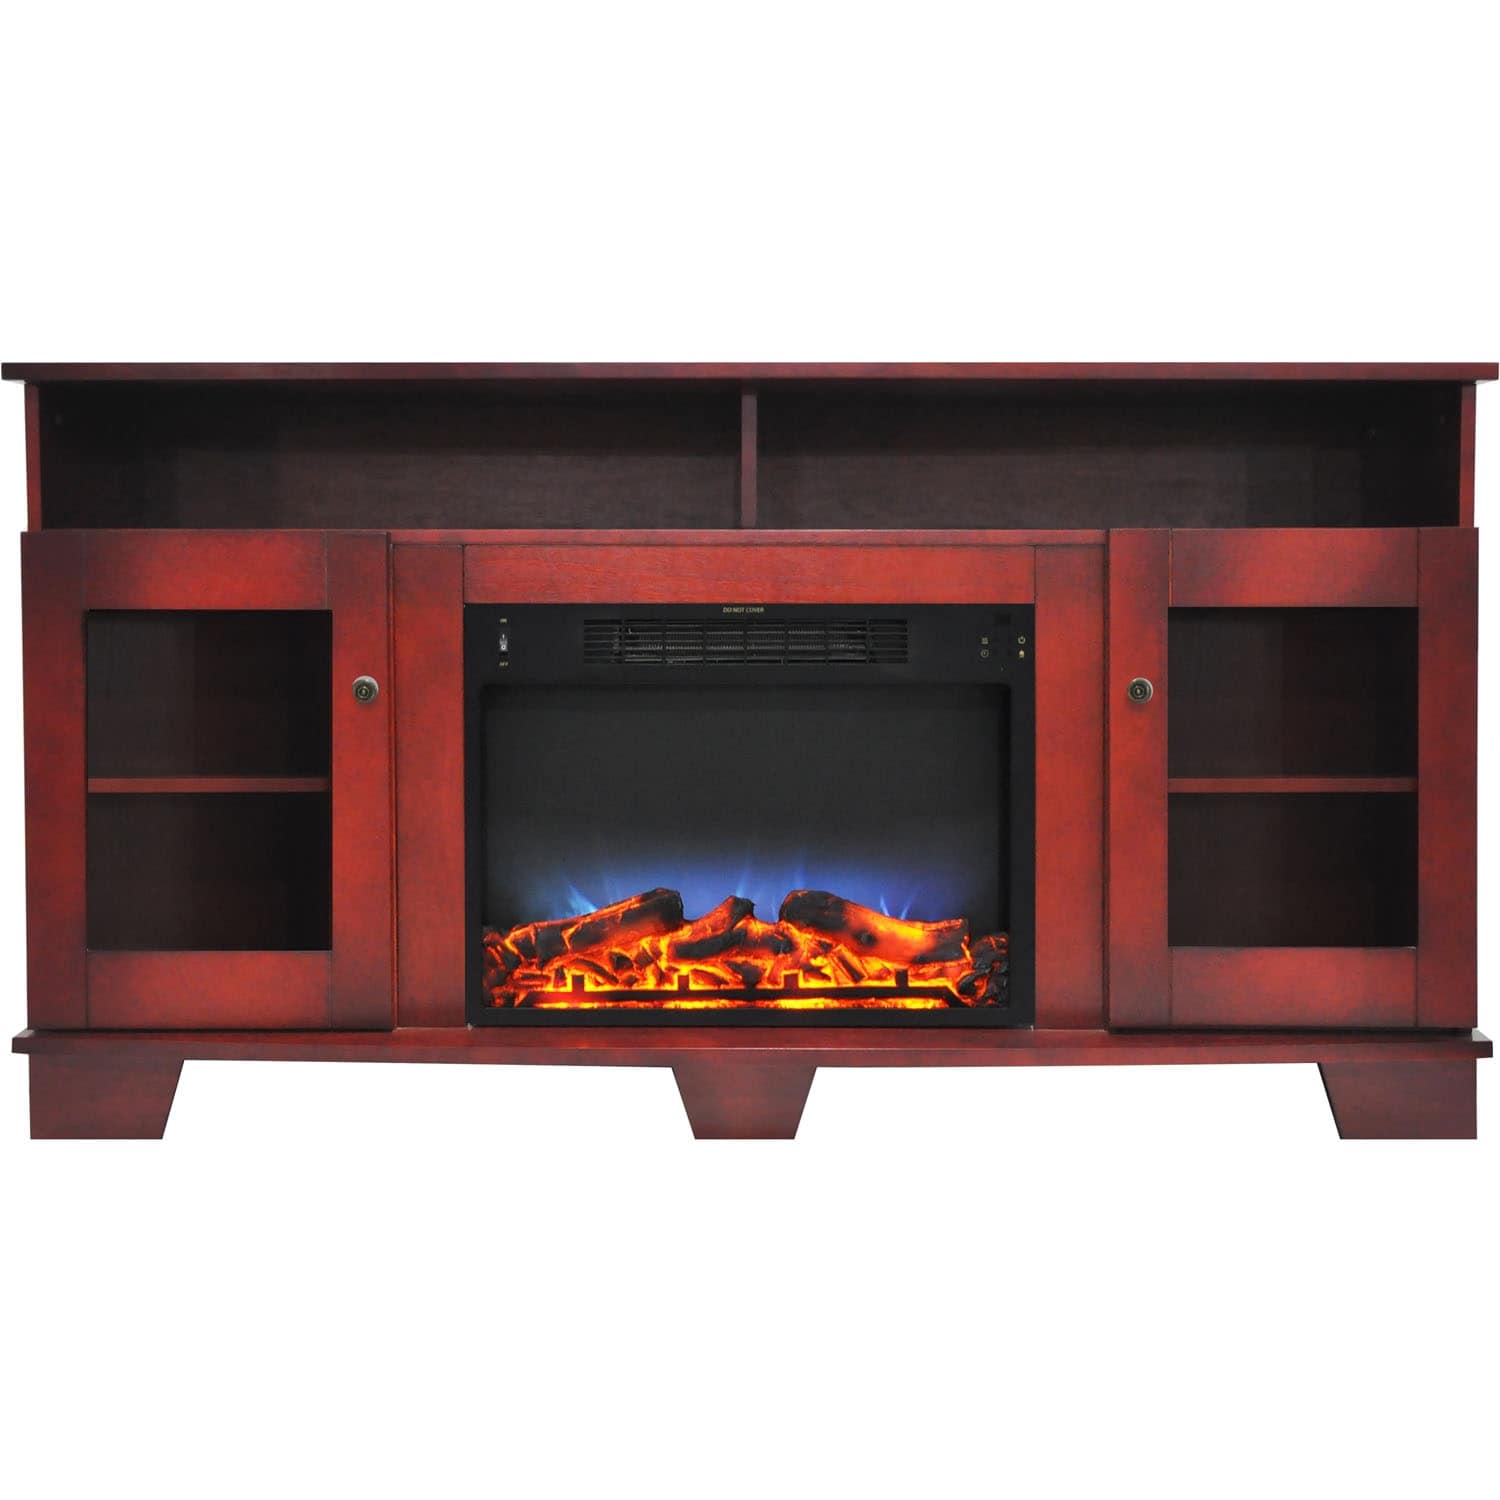 Cambridge Savona 59 In. Electric Fireplace in Cherry with Entertainment Stand and Multi-Color LED Flame Display